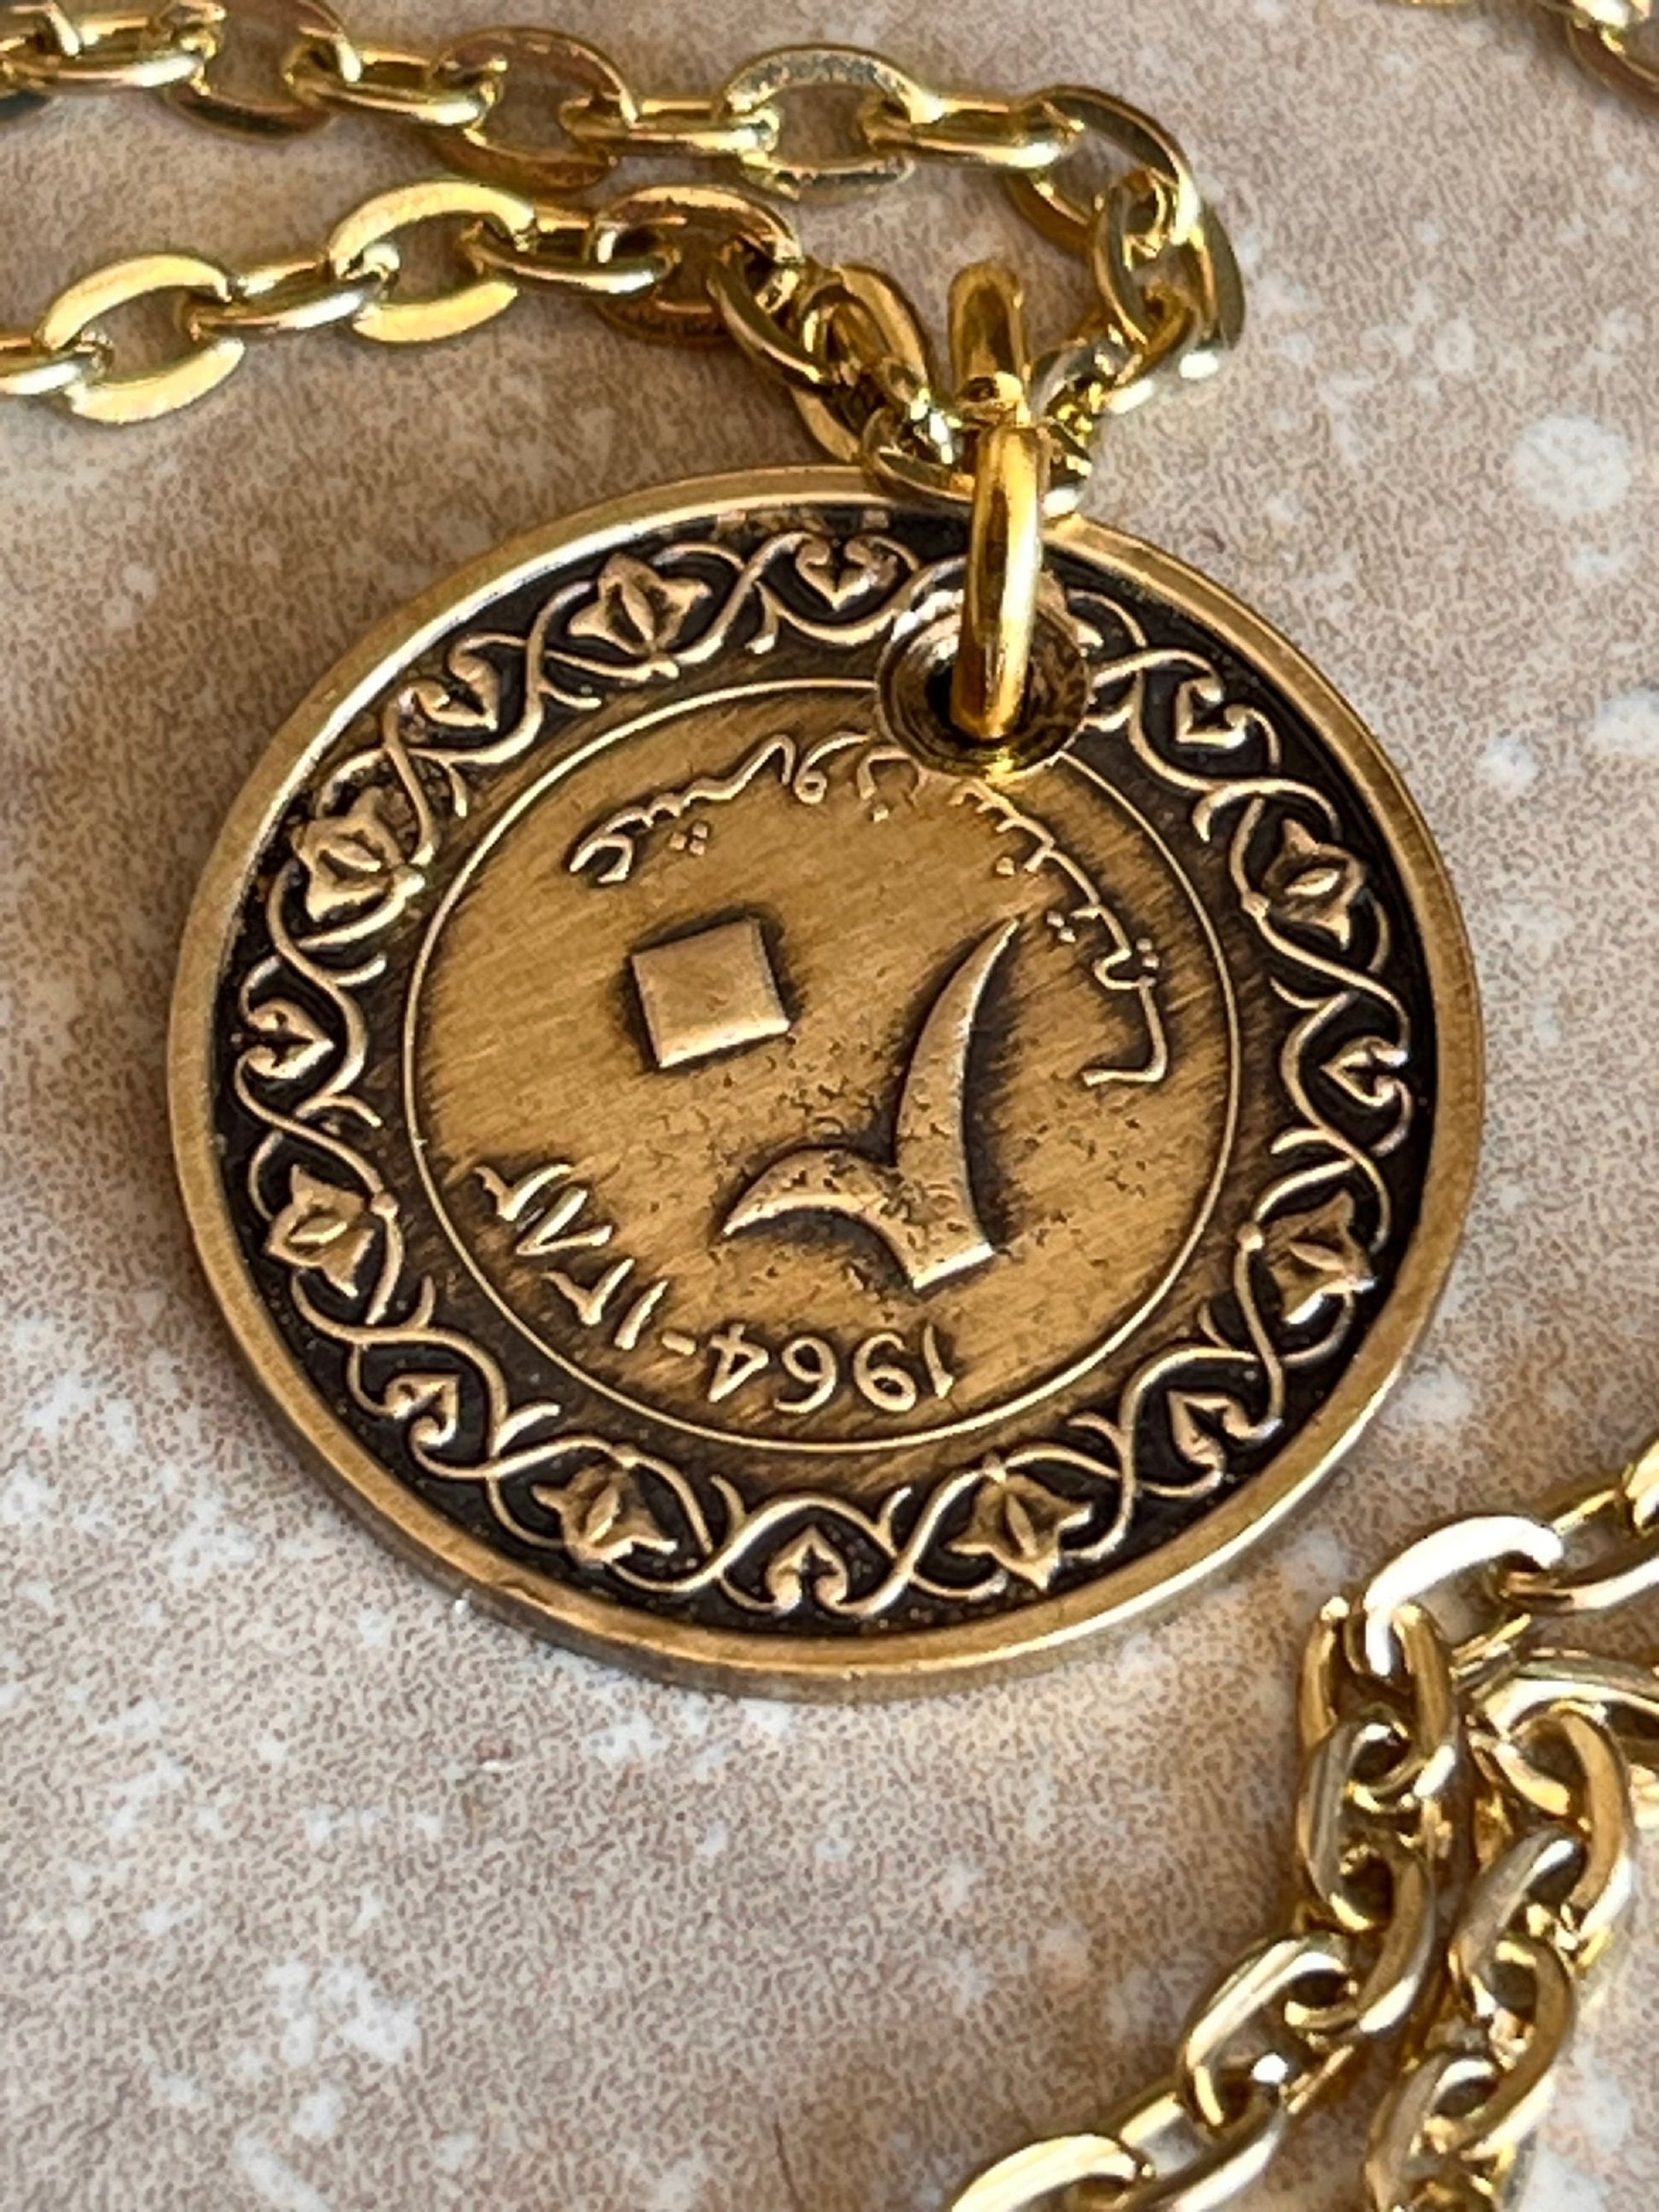 Algeria 20 Centimes Coin Pendant Algerian Personal Necklace Old Vintage Handmade Jewelry Gift Friend Charm For Him Her World Coin Collector